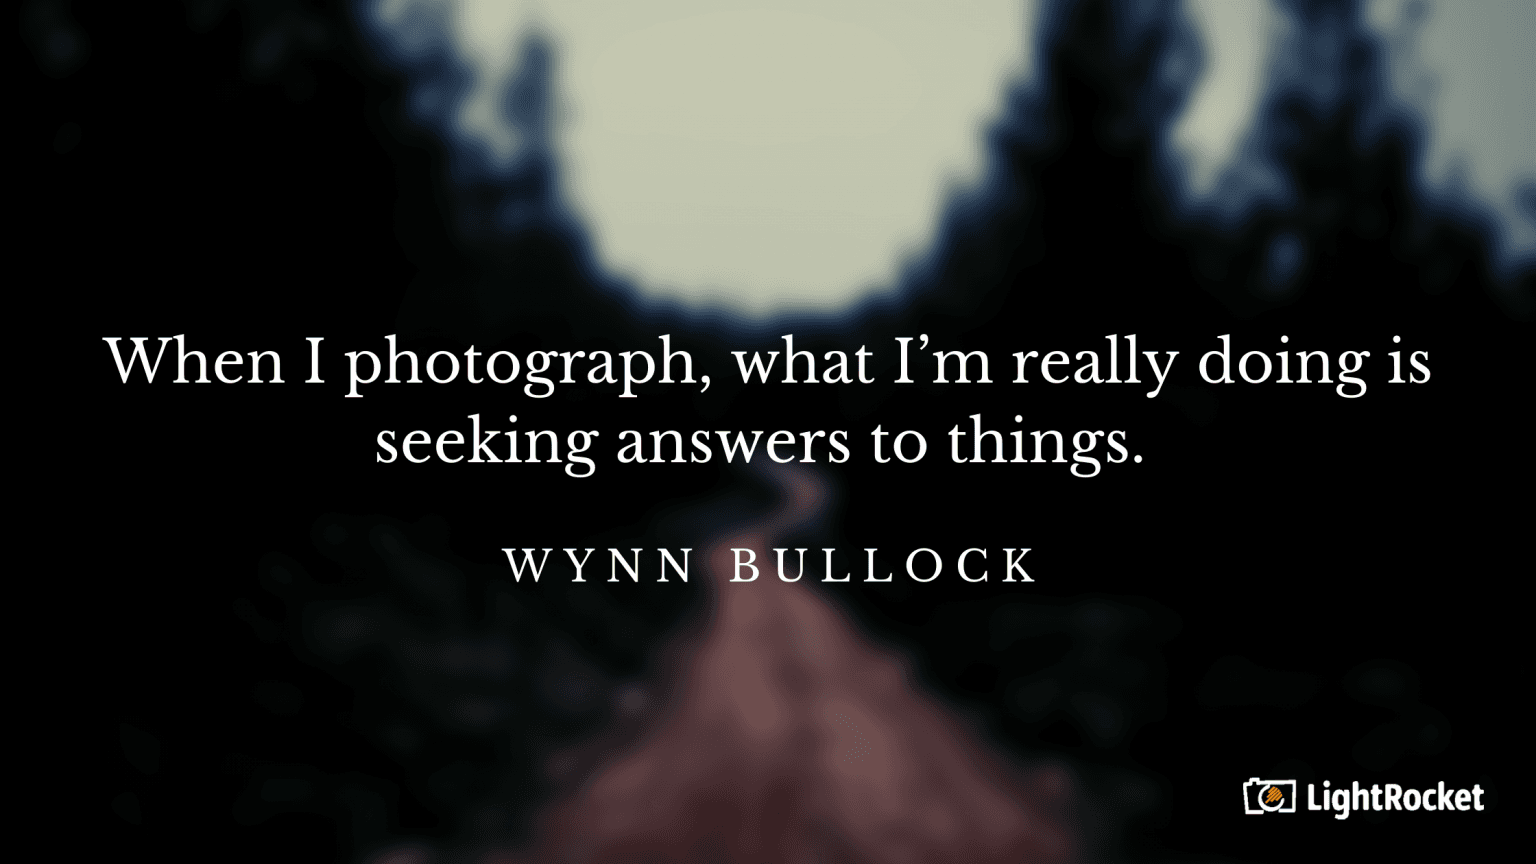 “When I photograph, what I’m really doing is seeking answers to things.” – Wynn Bullock